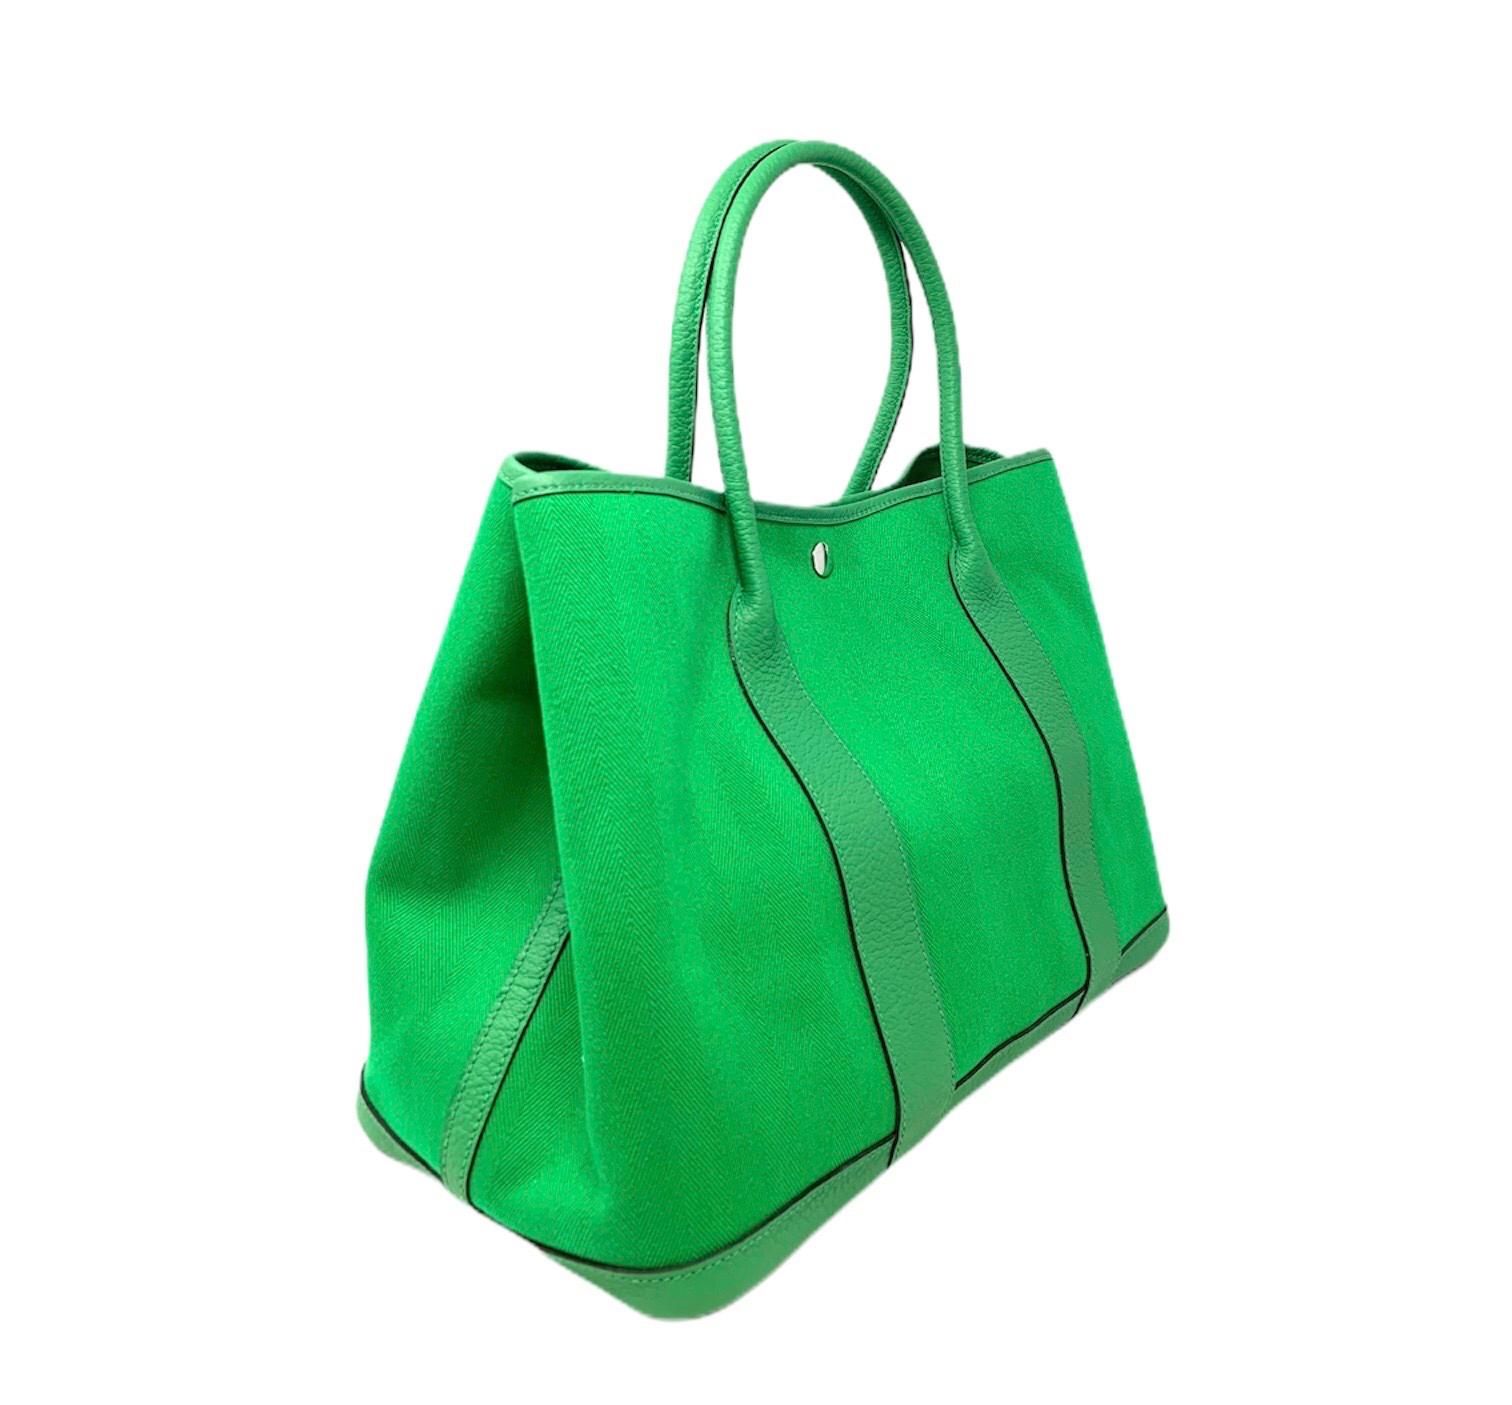 Hermes Garden Party 35 bag in fabric and leather inserts. excellent condition is carried by hand. Hdw Silver.
Green Bamboo color, Dust Bag included. Stamp R in a square.